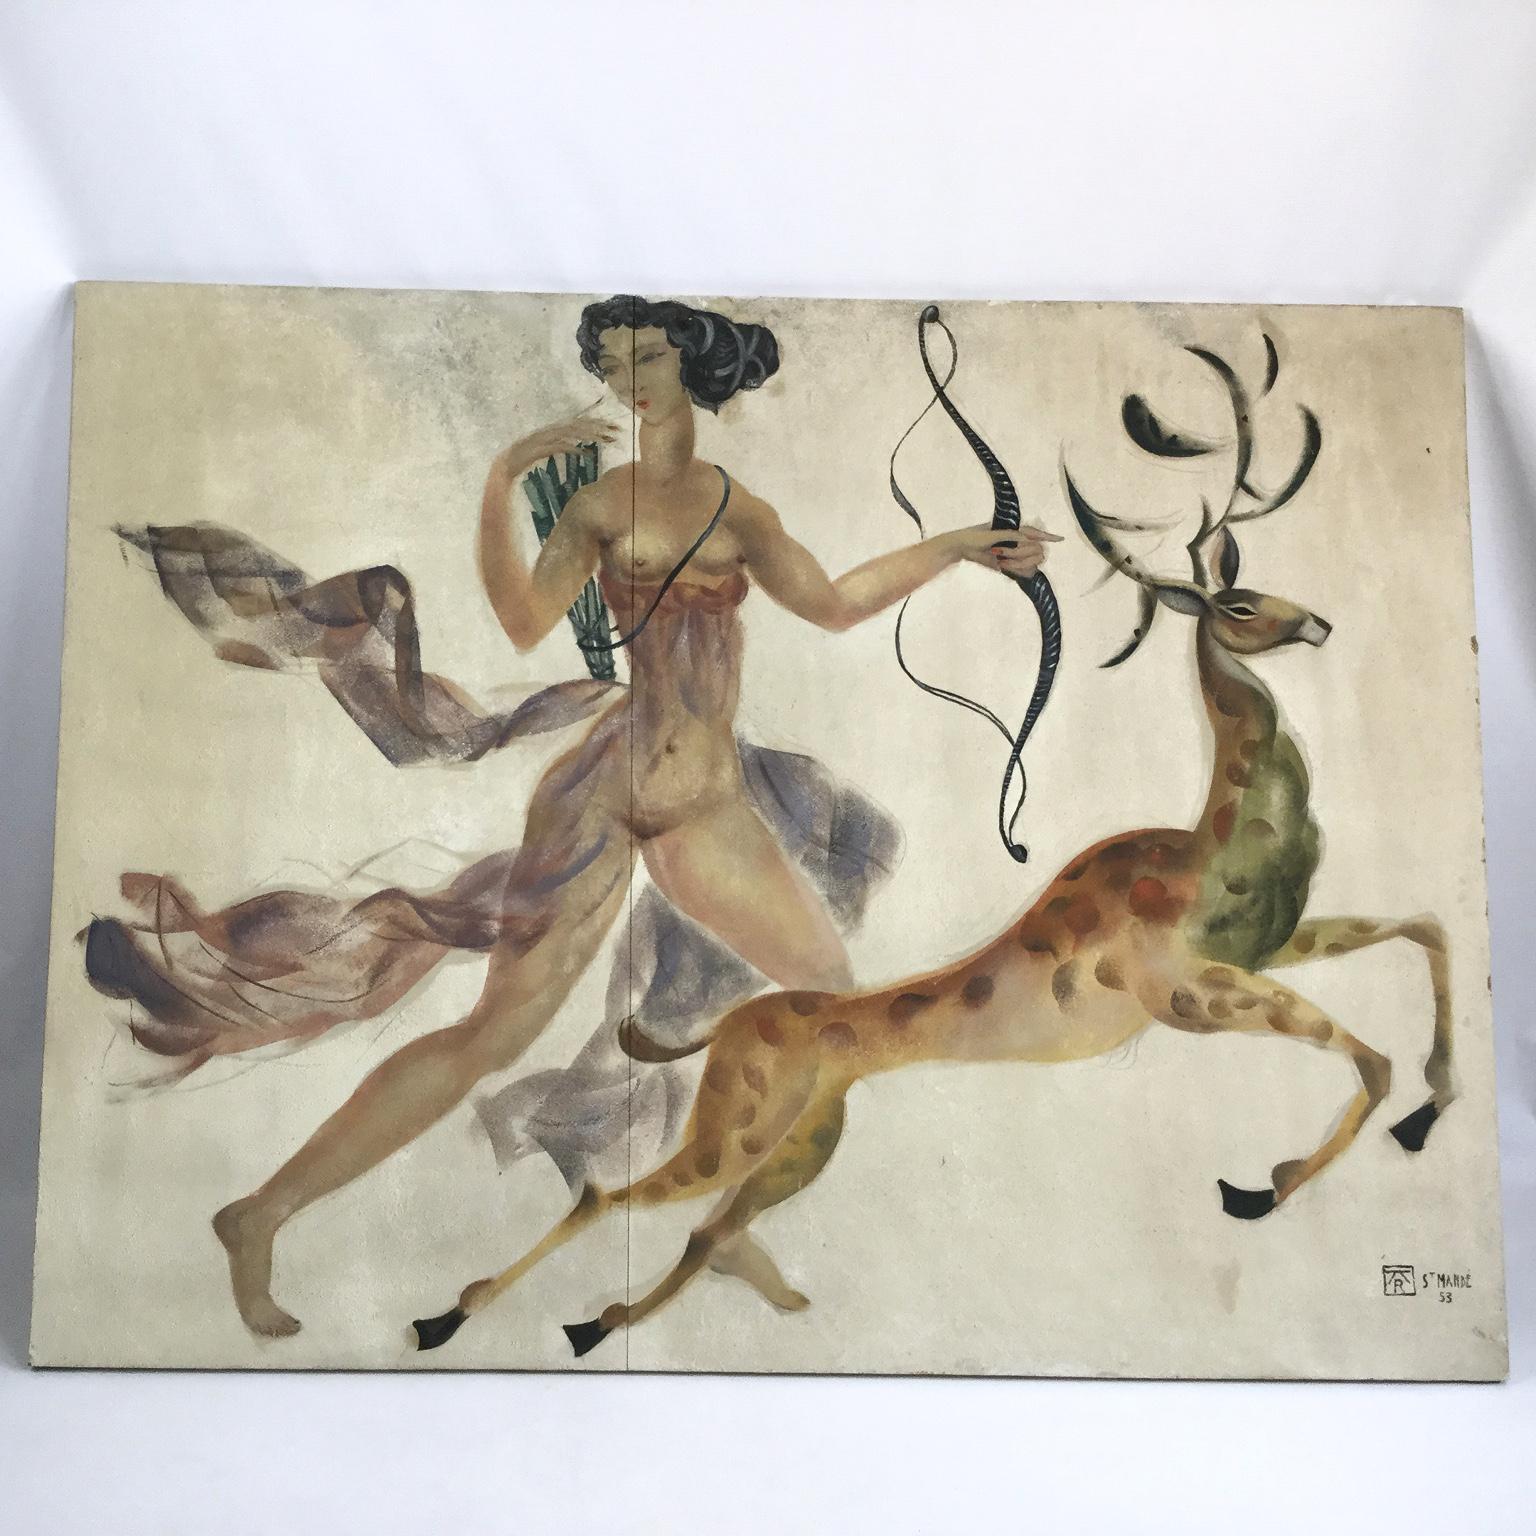 Wall decorative nude painting, on a large panel from the early 1950s in an Art Deco style.
Representing the goddess 